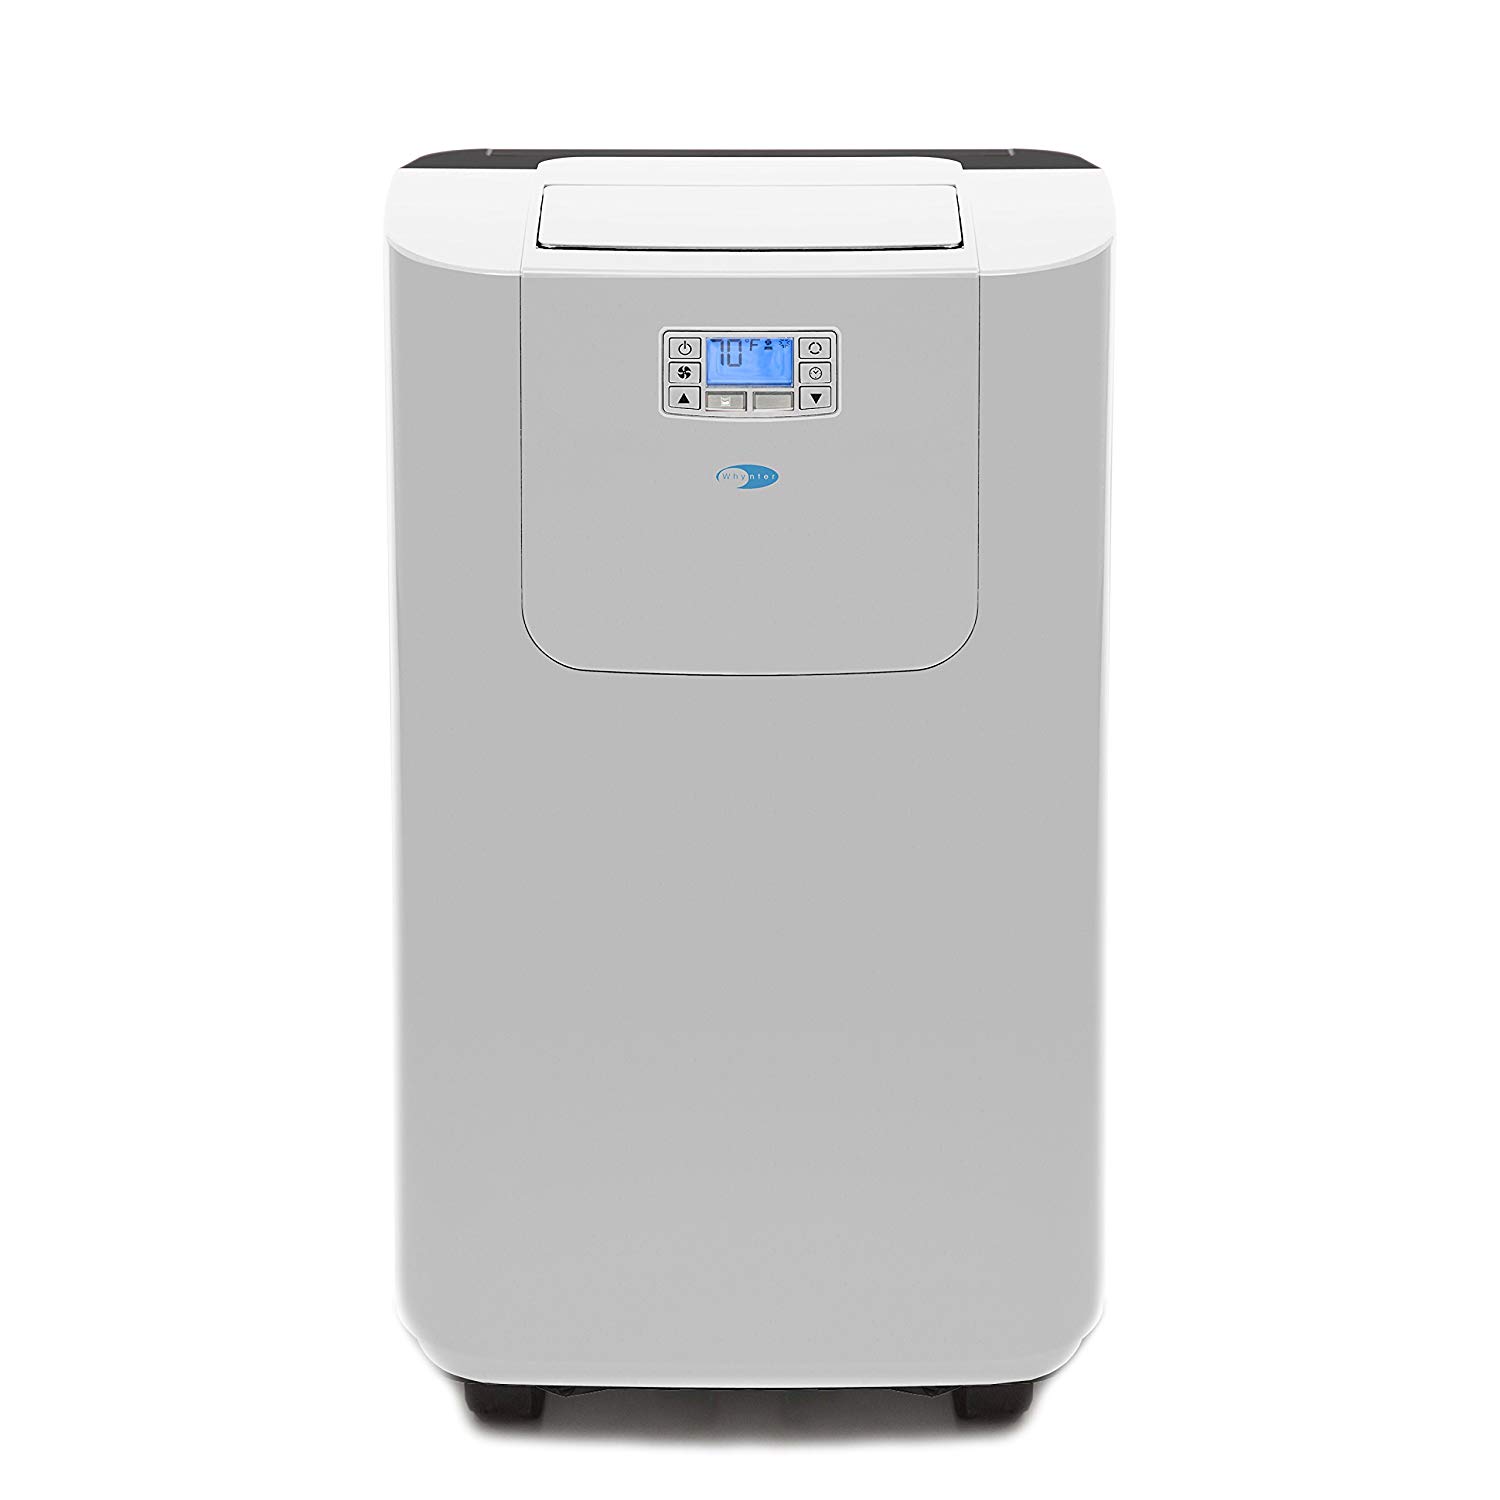 Whynter Elite ARC-122DS 12,000 BTU Dual Hose Portable Air Conditioner, Dehumidifier, Fan with Activated Carbon Filter plus Storage bag for Rooms up to 400 sq ft